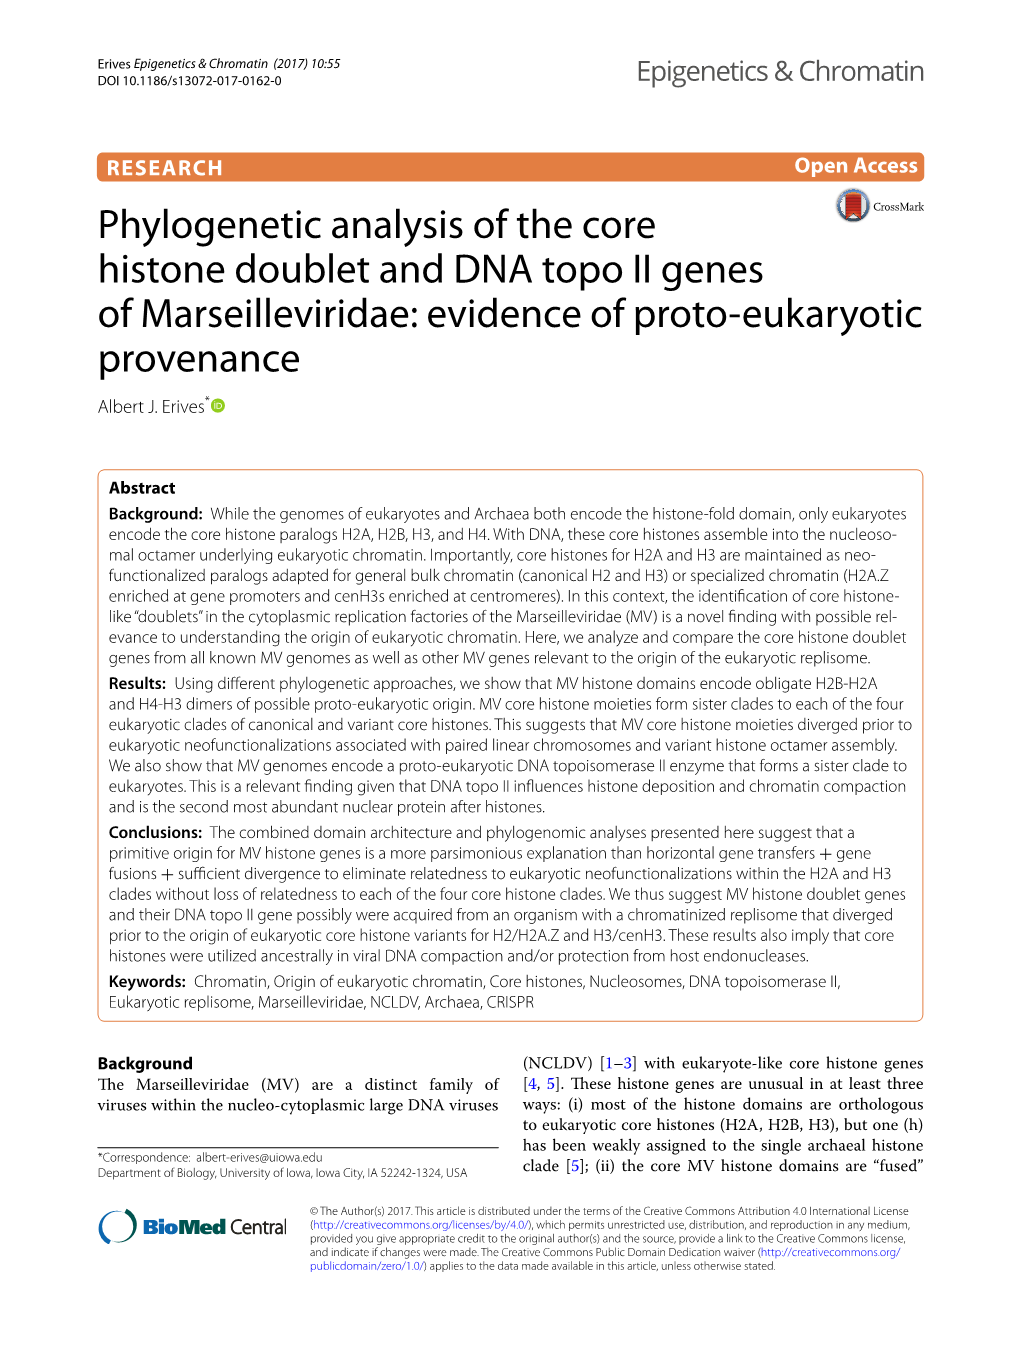 Phylogenetic Analysis of the Core Histone Doublet and DNA Topo II Genes of Marseilleviridae: Evidence of Proto‑Eukaryotic Provenance Albert J